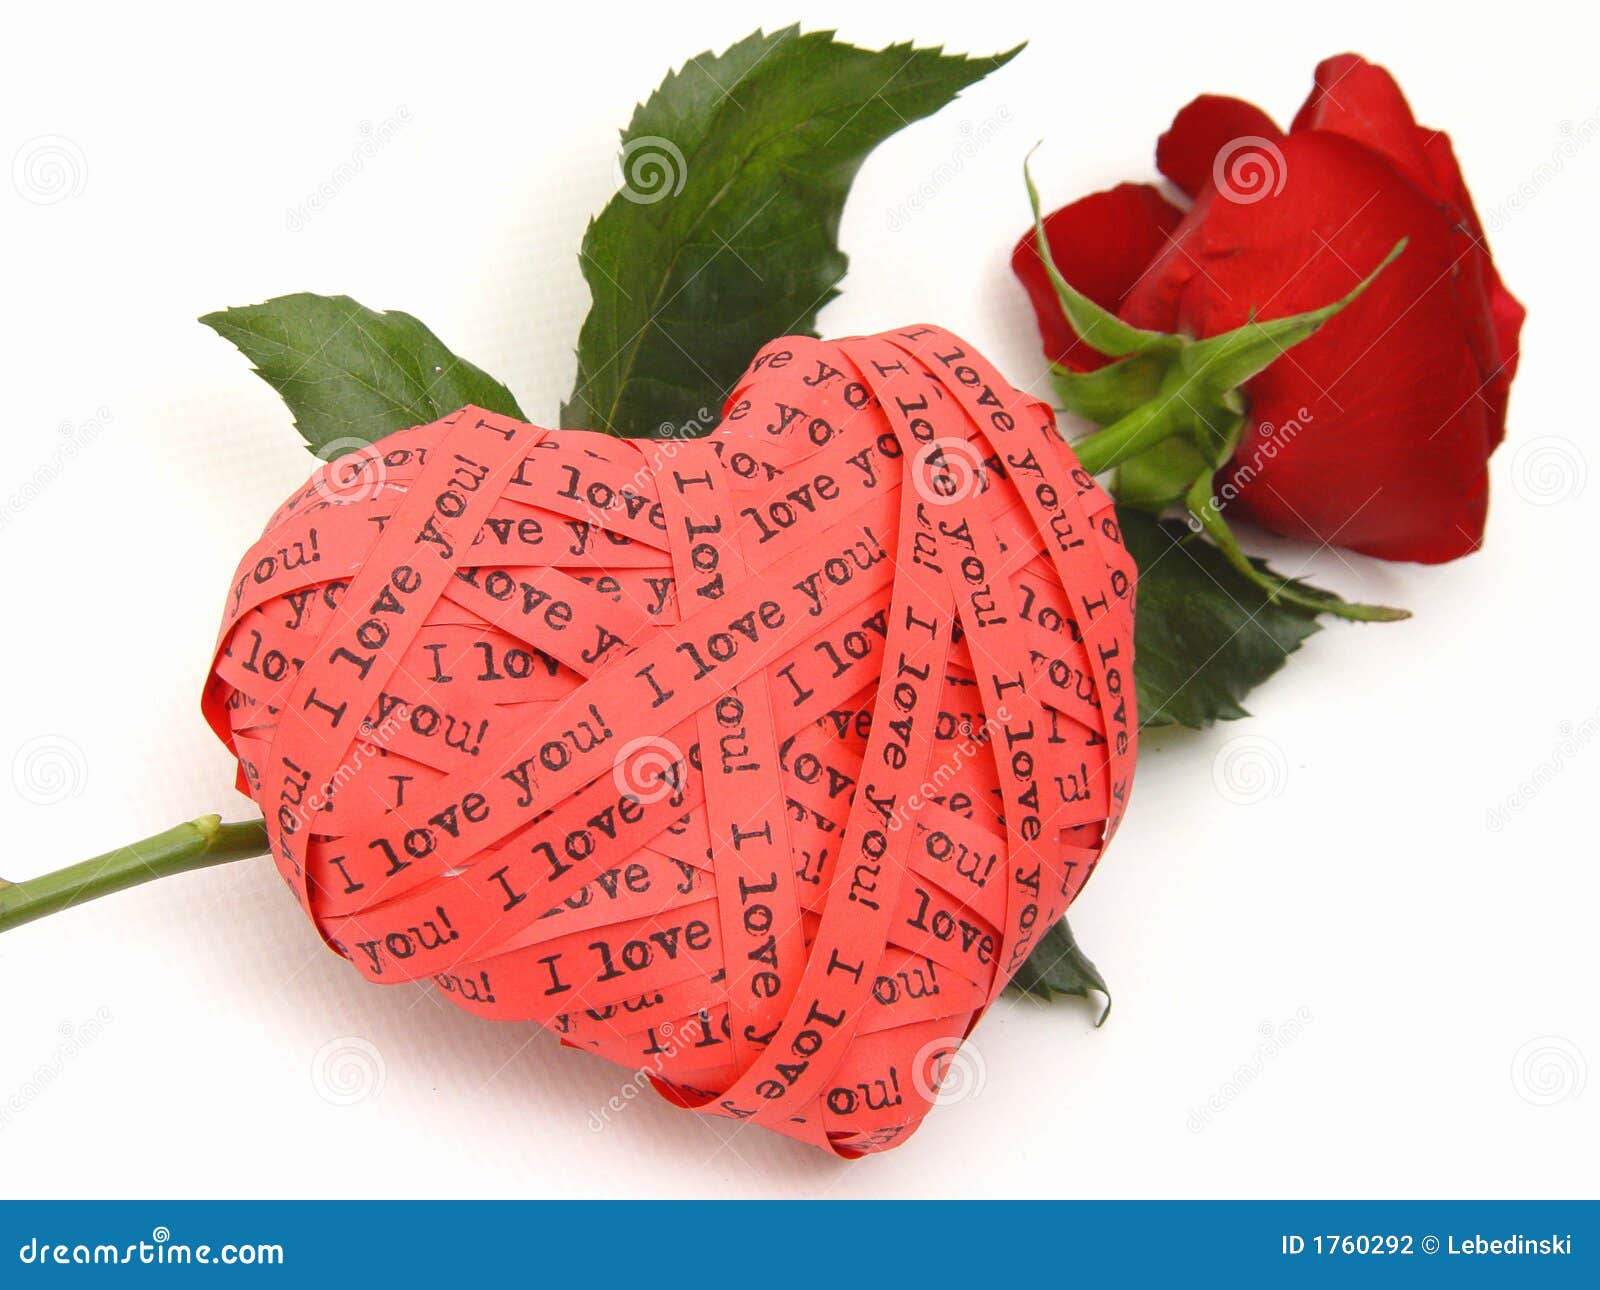 I love you heart and rose stock photo. Image of love, long - 1760292